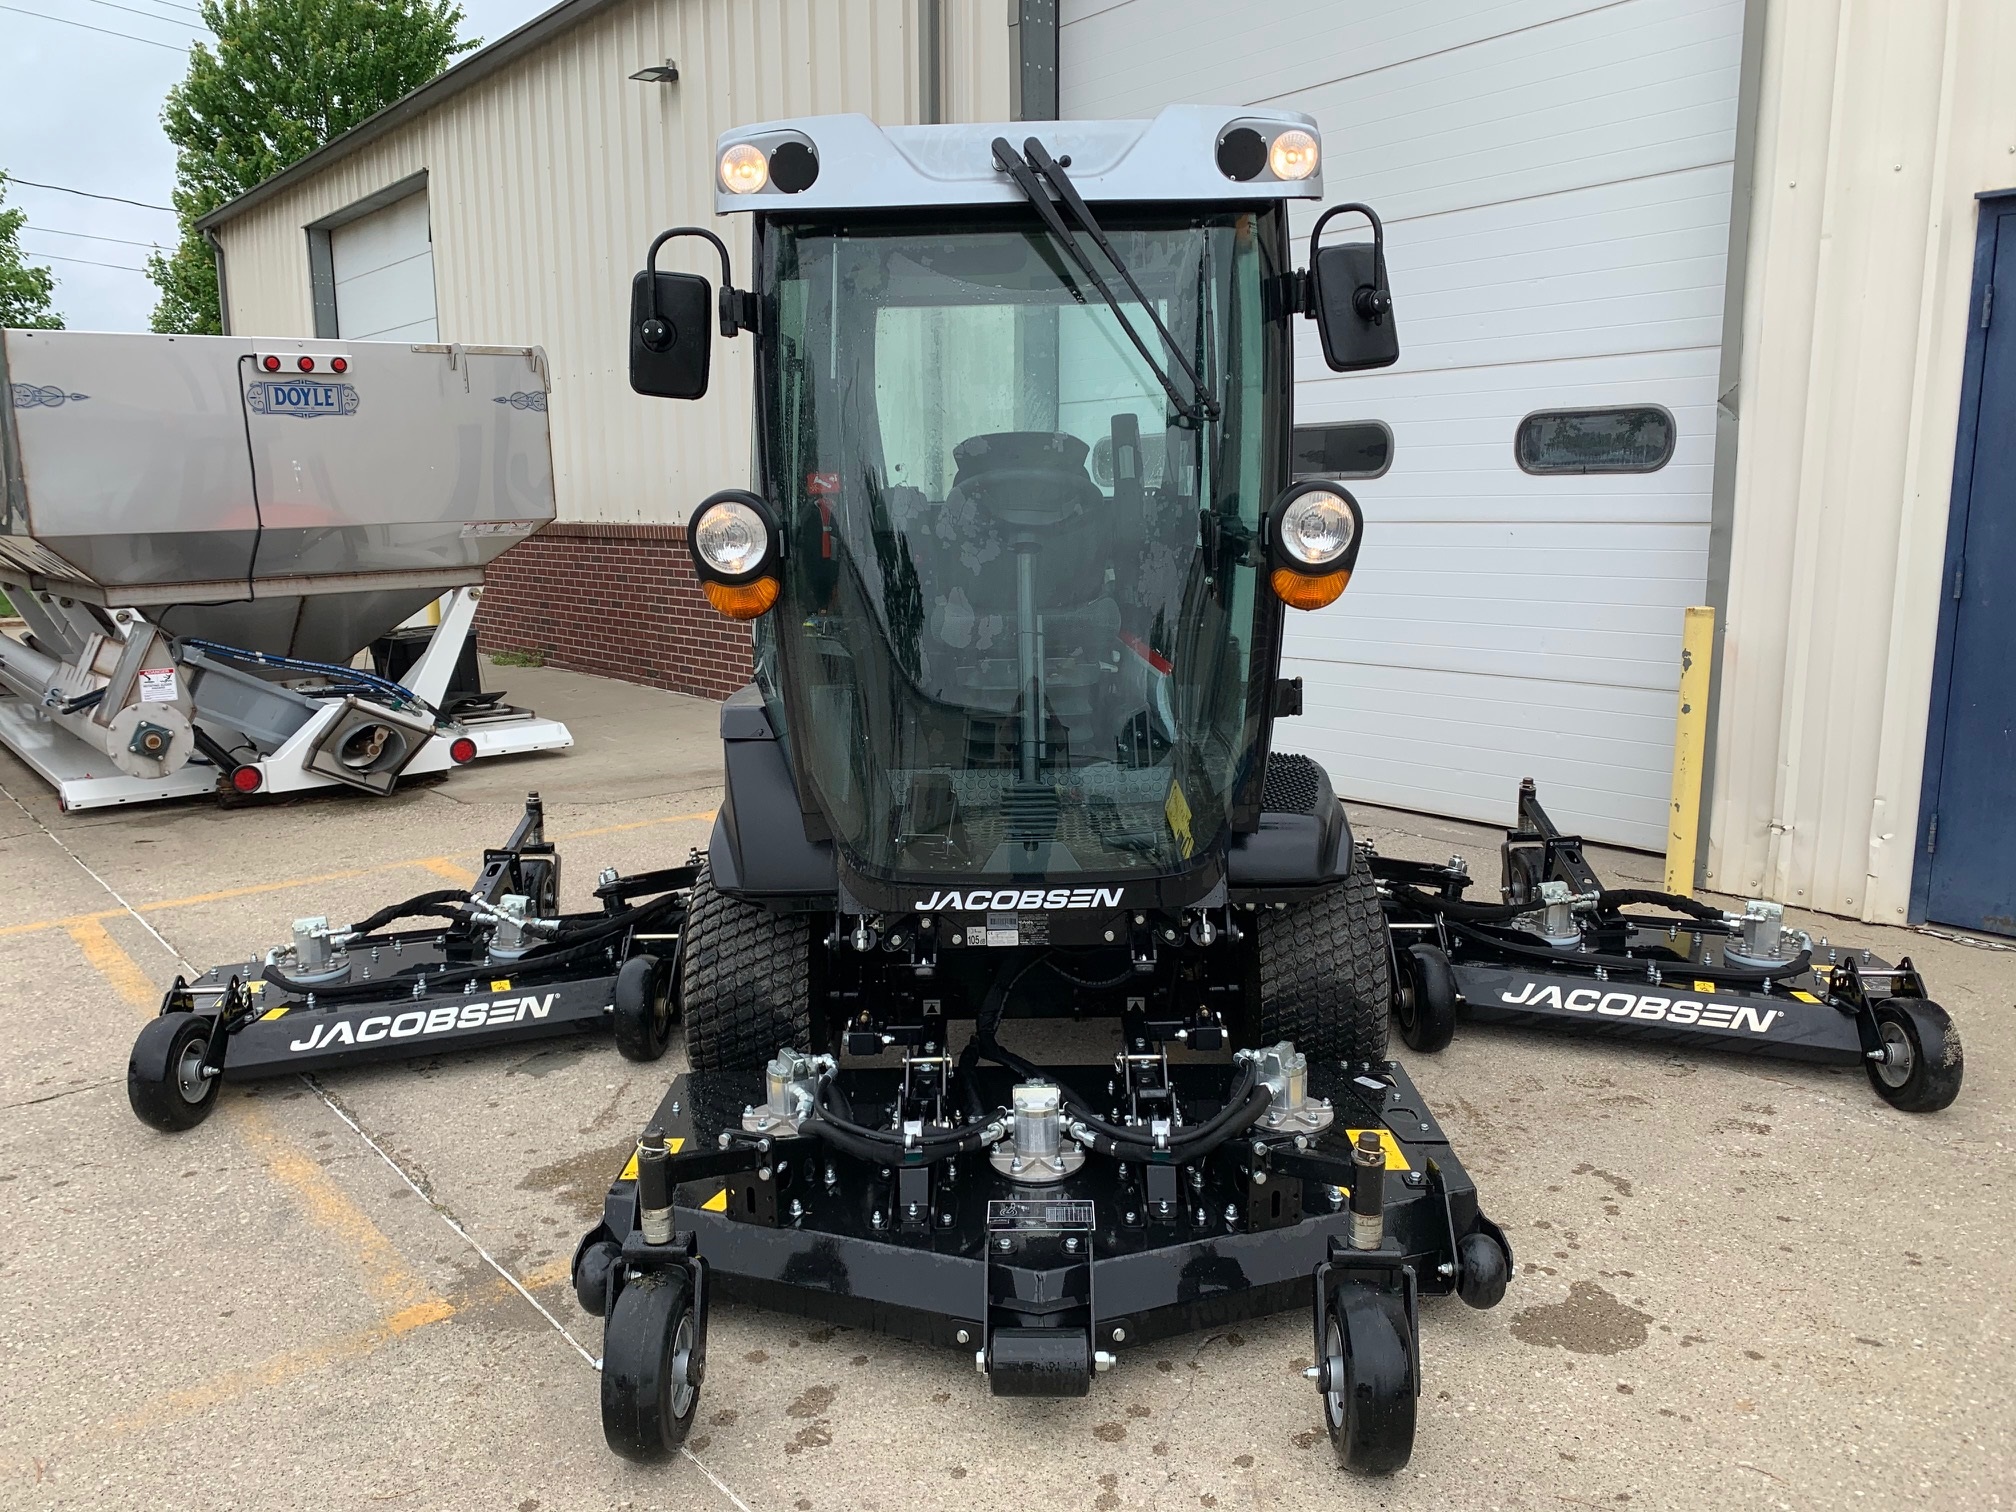 Gloed generatie homoseksueel Turfwerks on Twitter: "We're rolling used equipment out of our service  shop. Now available and ready to go - a 2016 Jacobsen HR700 w/ cab. 68  hours and priced to sell! 📲